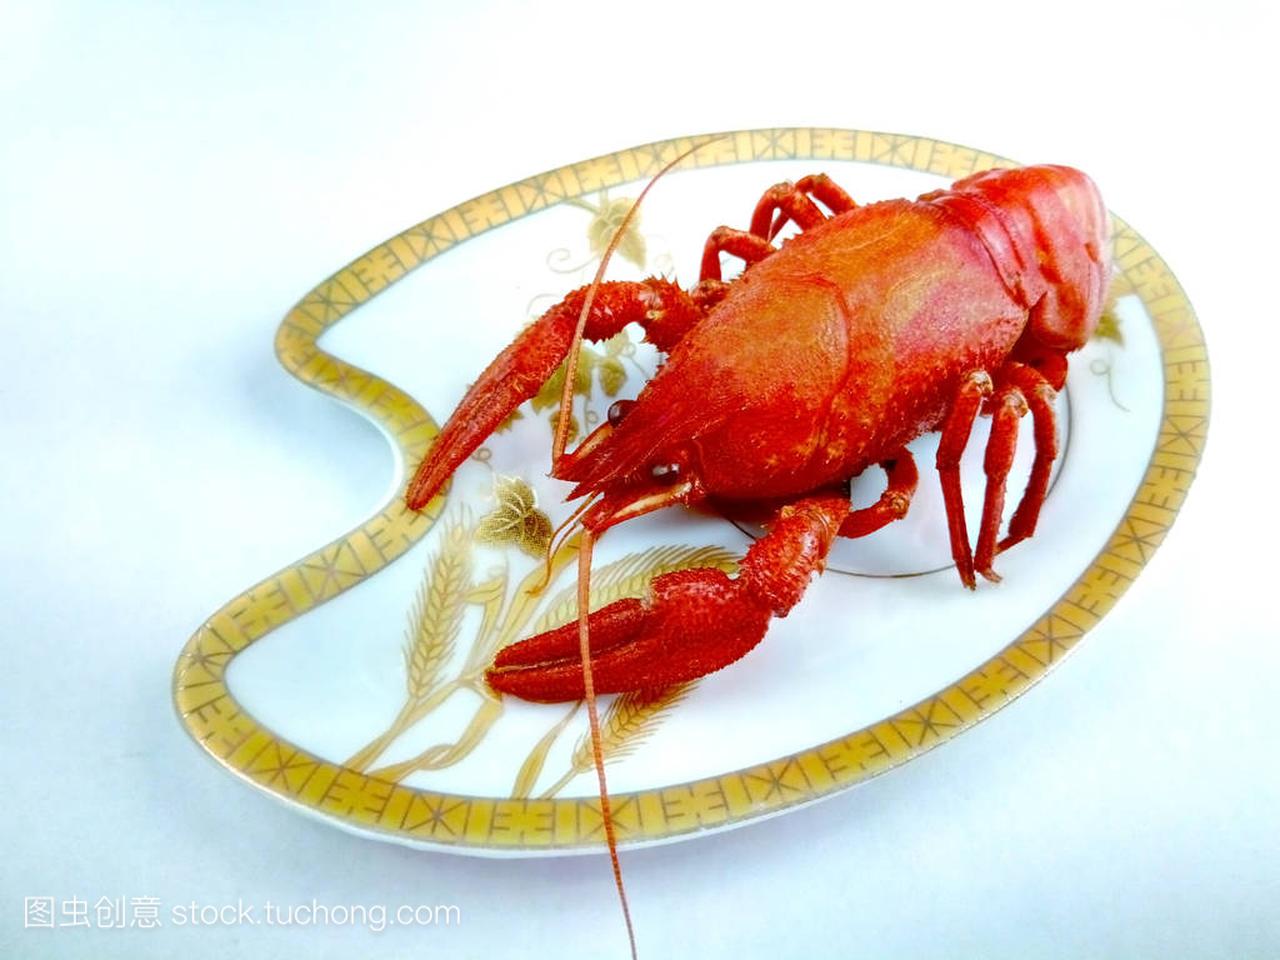 crayfish on the white plate lobster, delicious